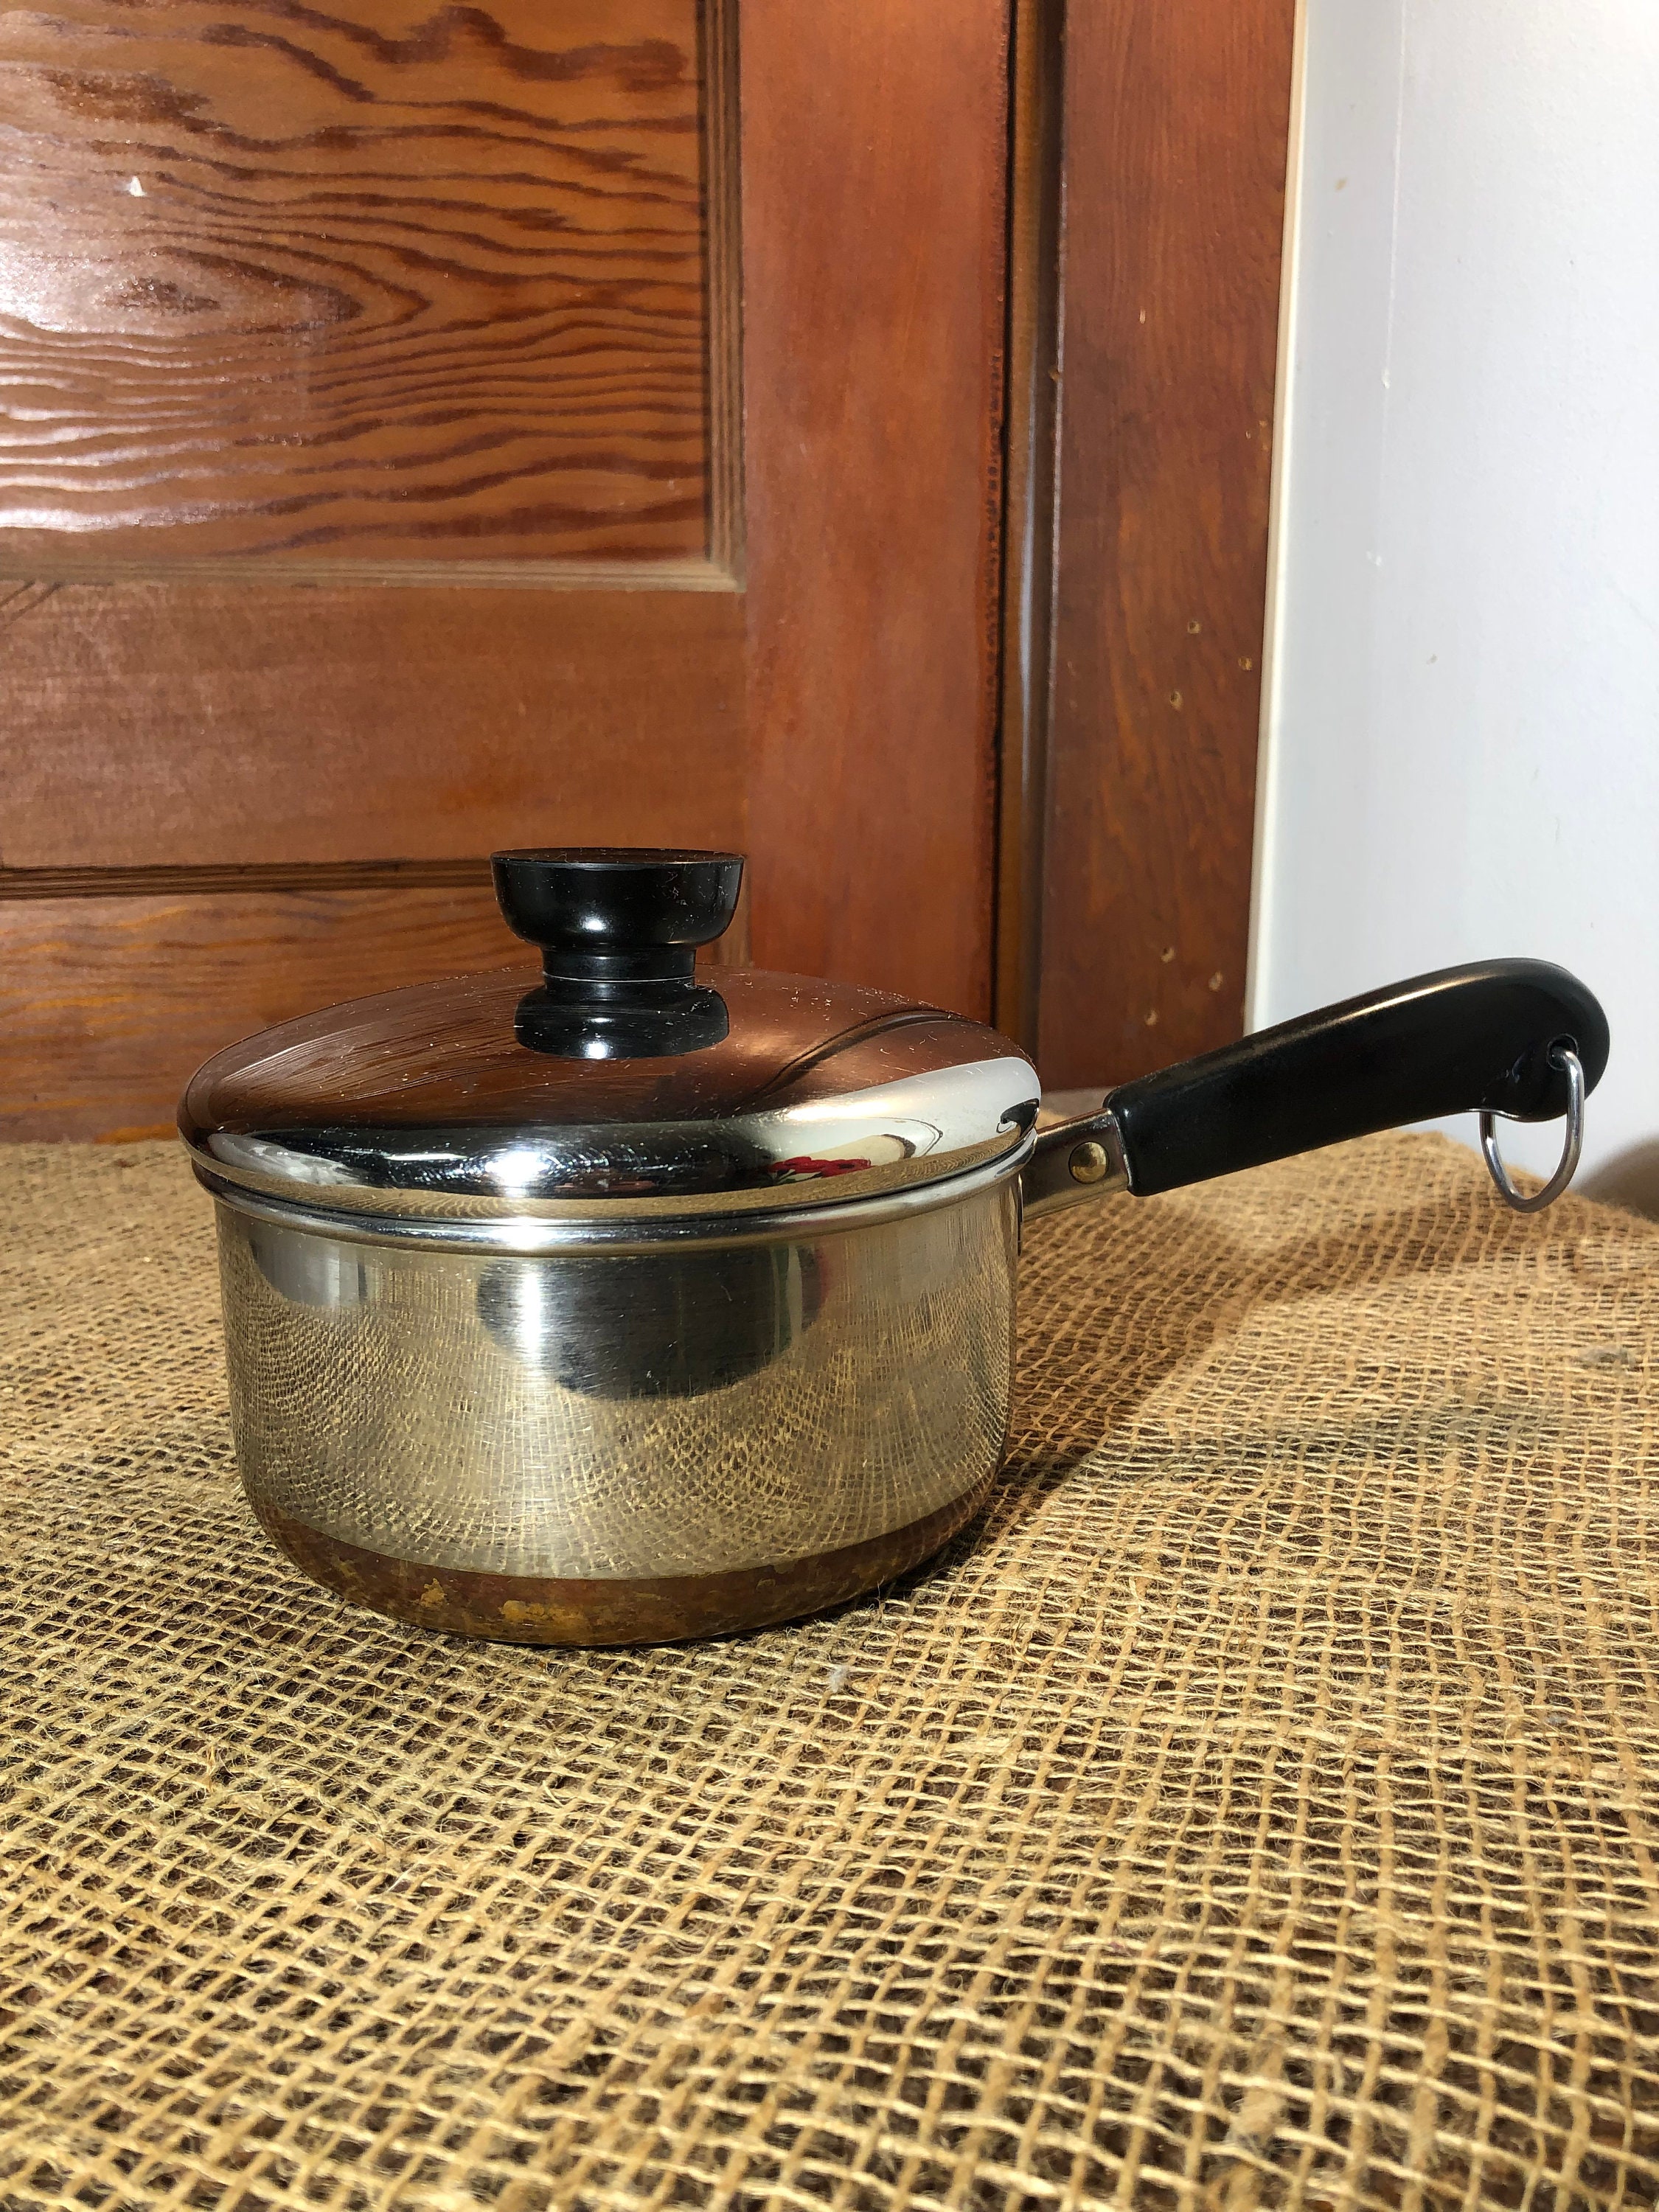 Revere Ware Pot Pan Skillet Stock Pot Selection ONLY NO LIDS - Your Choice